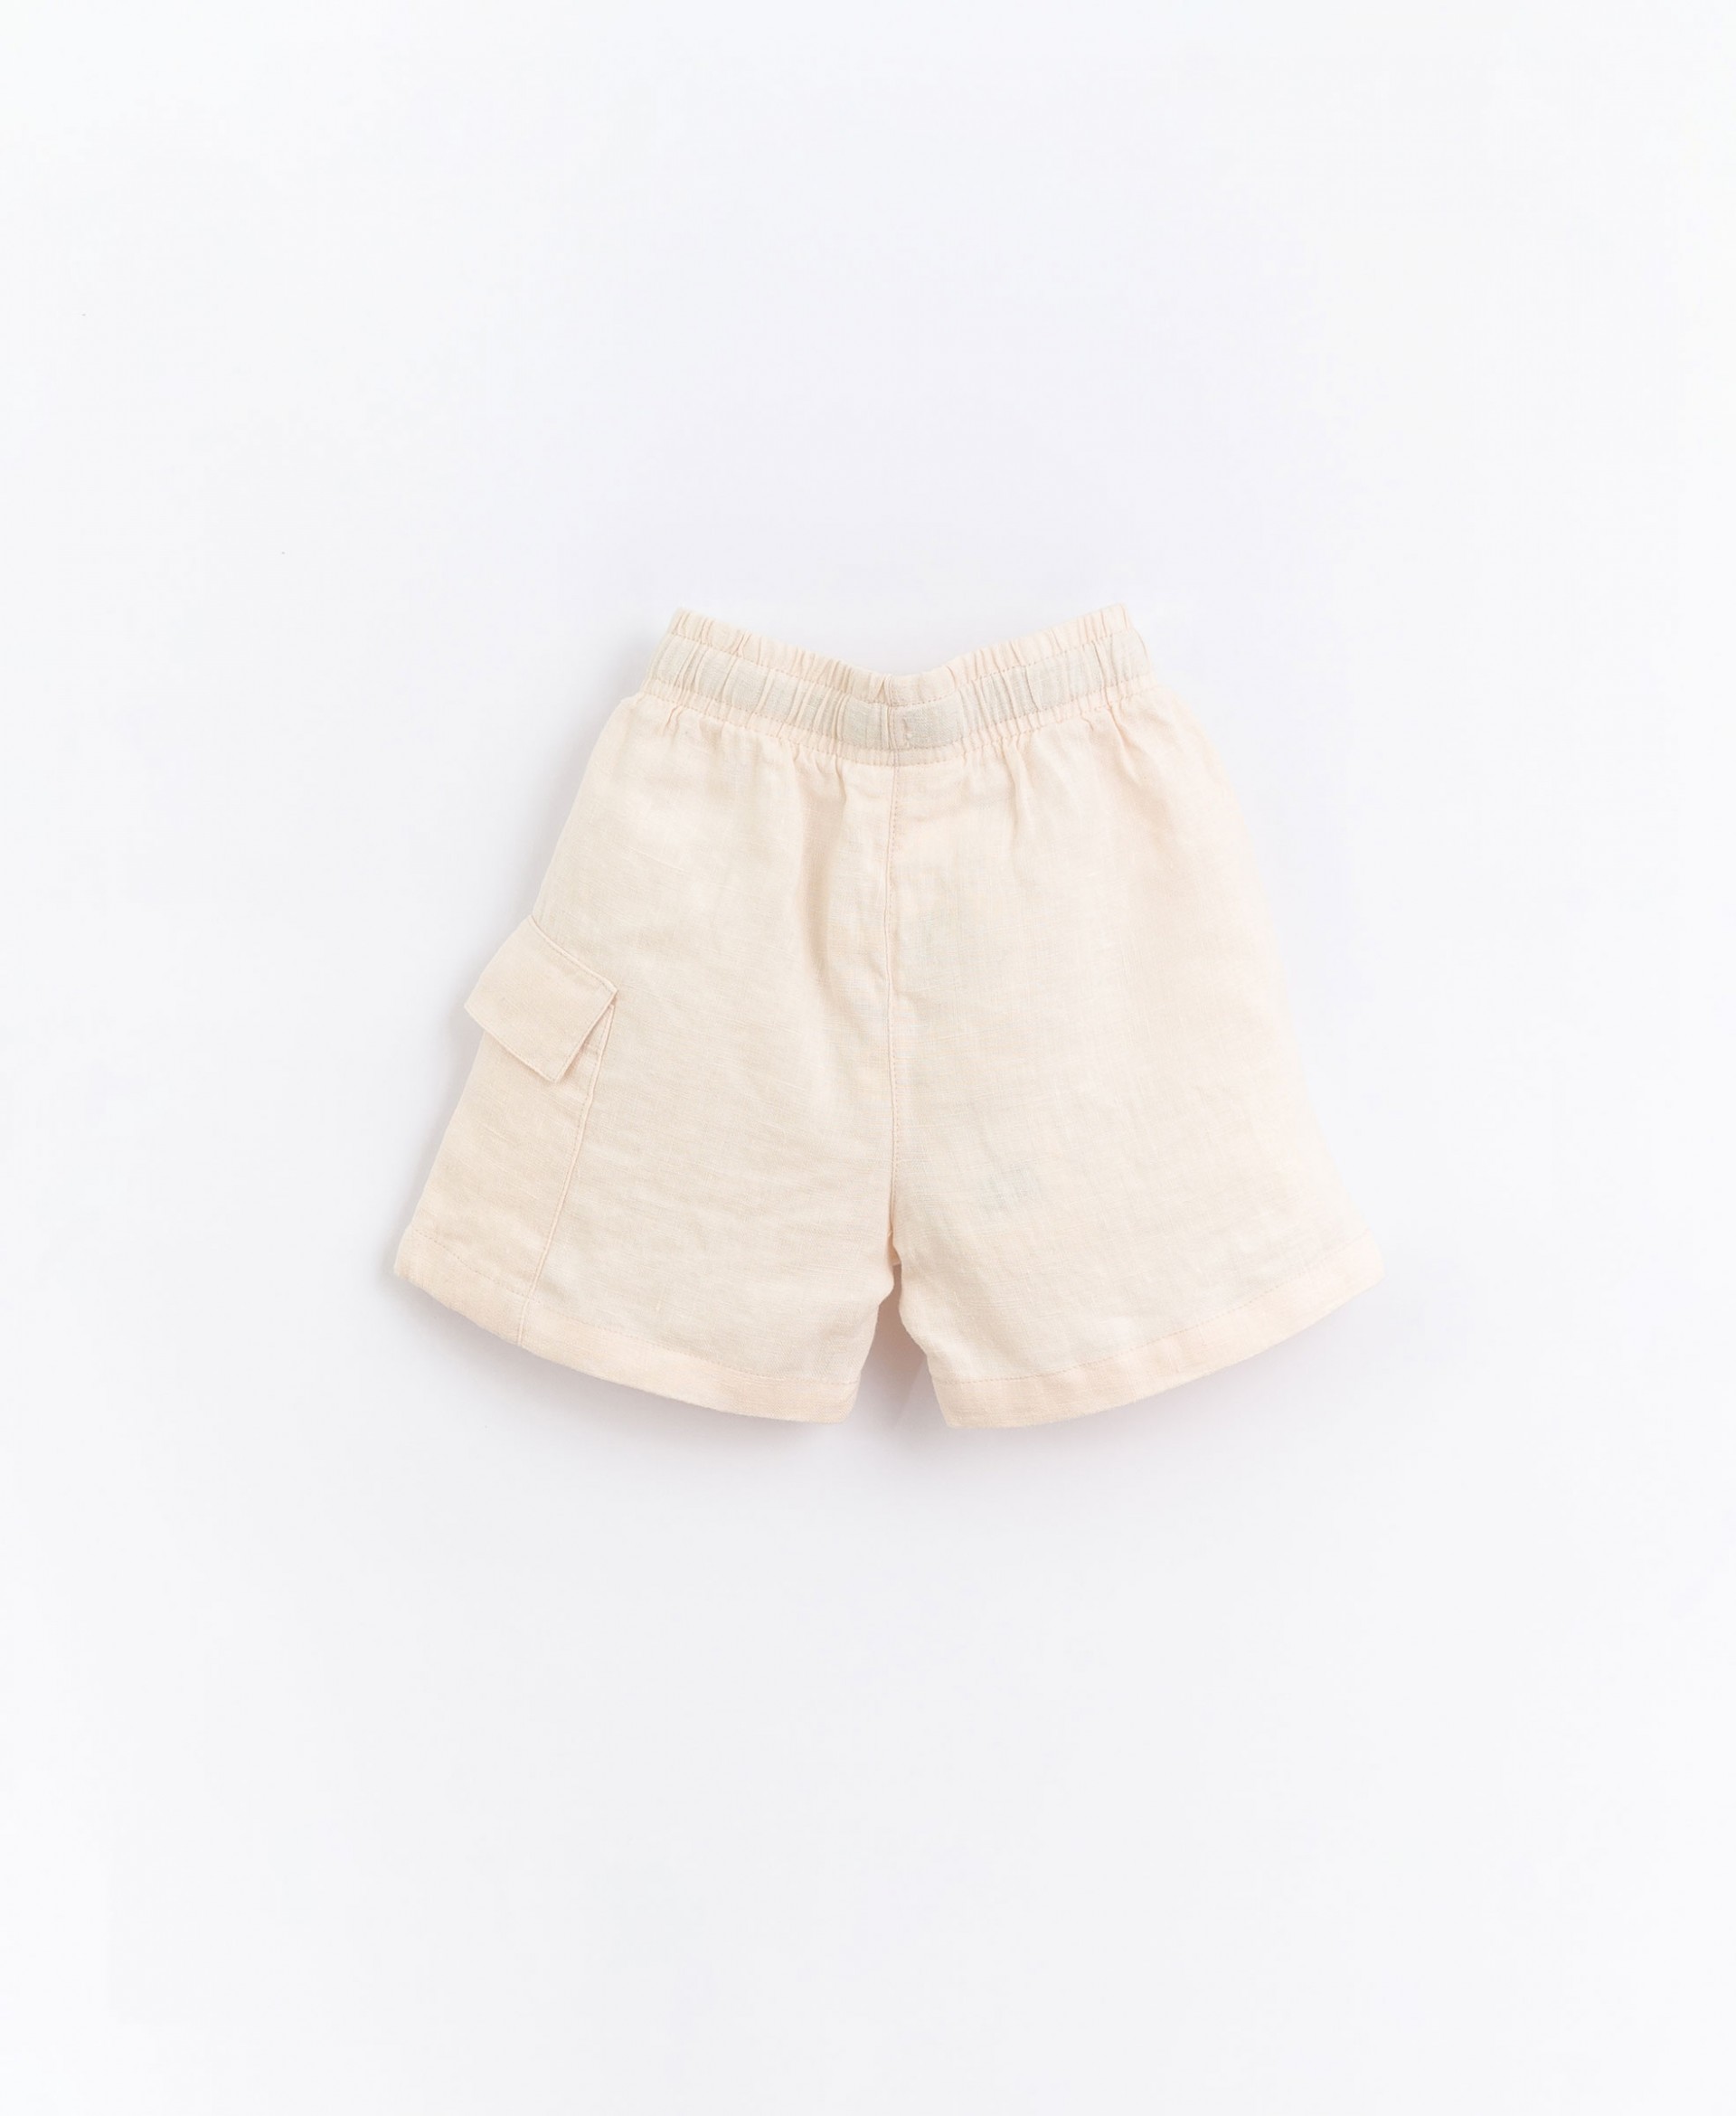 Linen shorts with pocket | Basketry